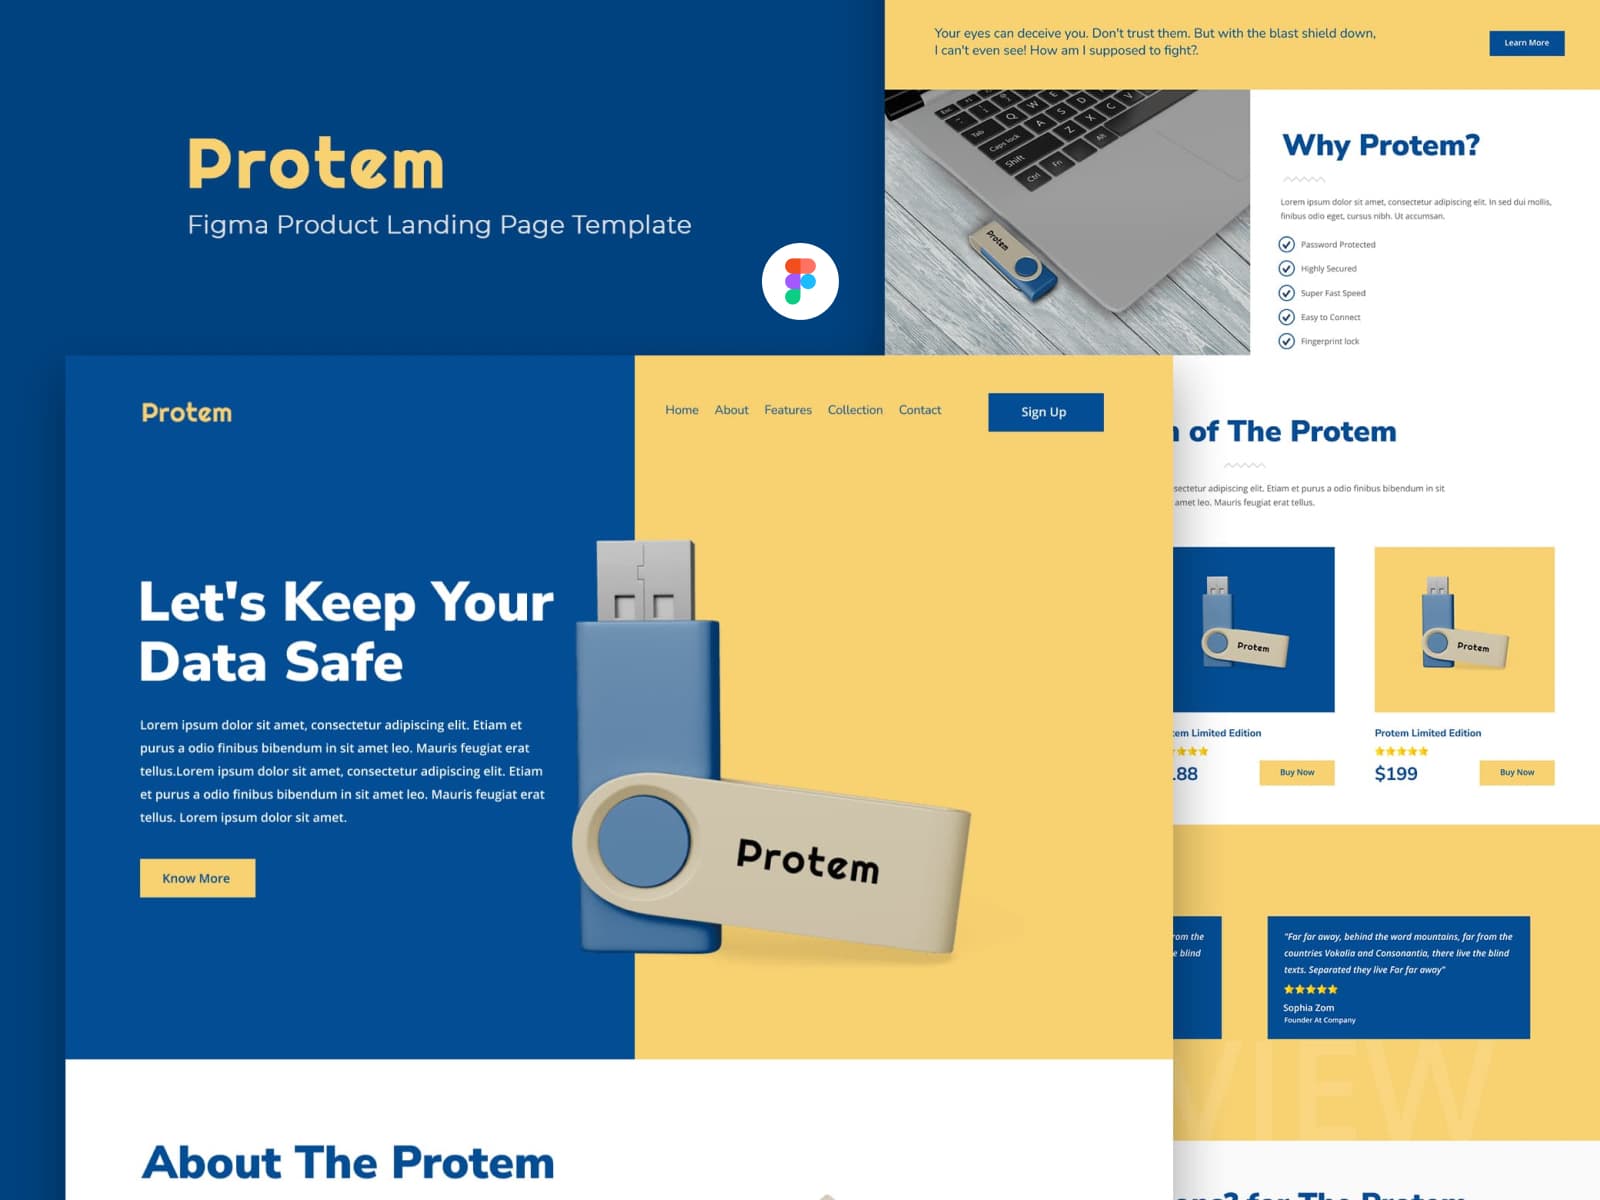 protem-figma-product-landing-page-template-2155